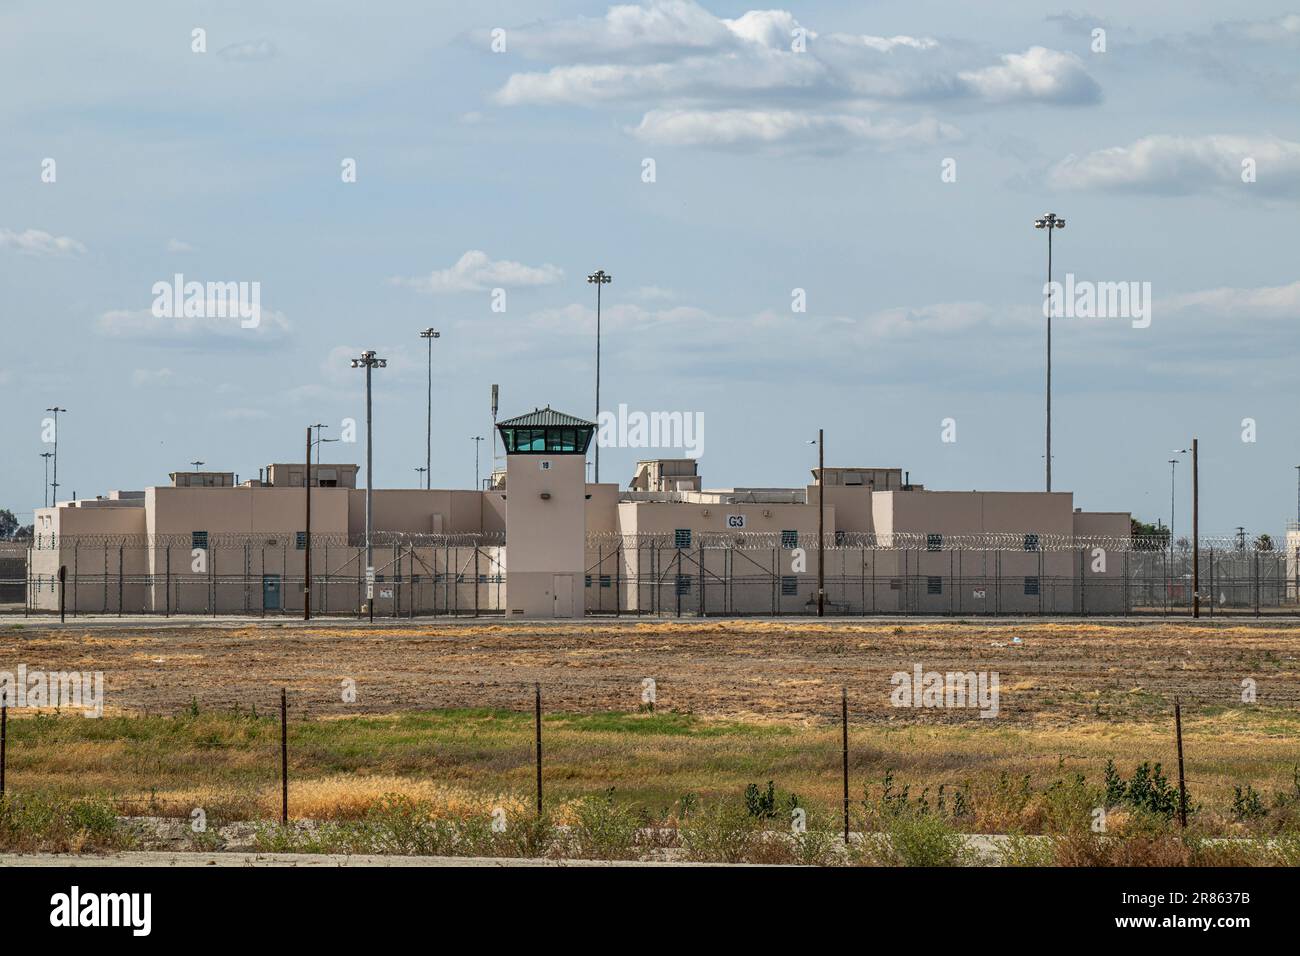 Corcoran State Prison next to Tulare Lake. Tulare Lake, located in ...